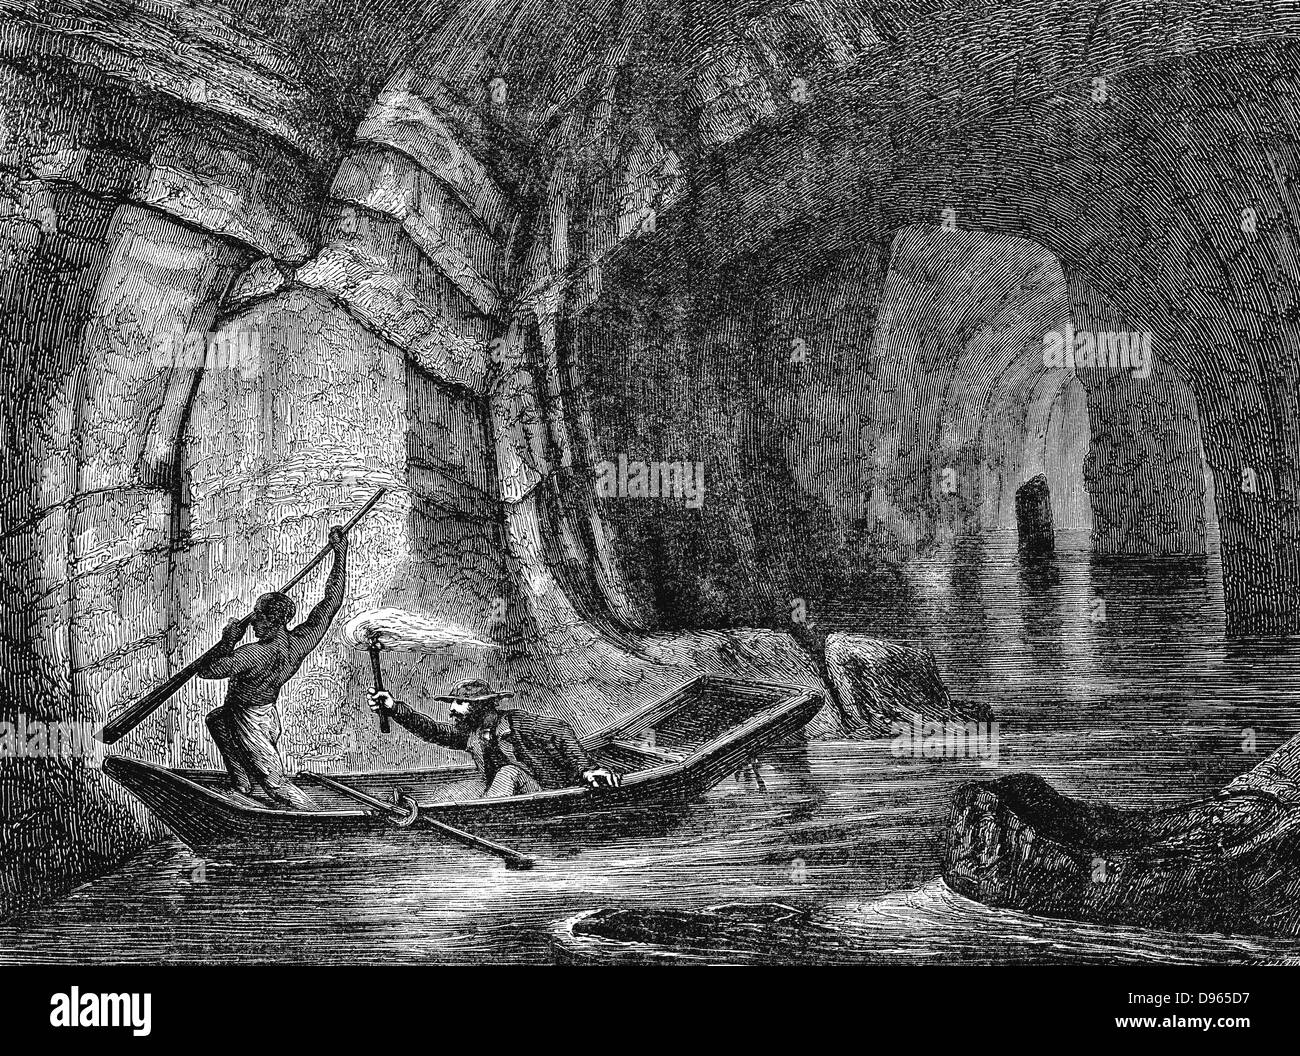 Exploring The Styx, a subterranean river in the Mammoth Cave, the system of limestone caverns in Kentucky, USA. Wood engraving  c1870 Stock Photo